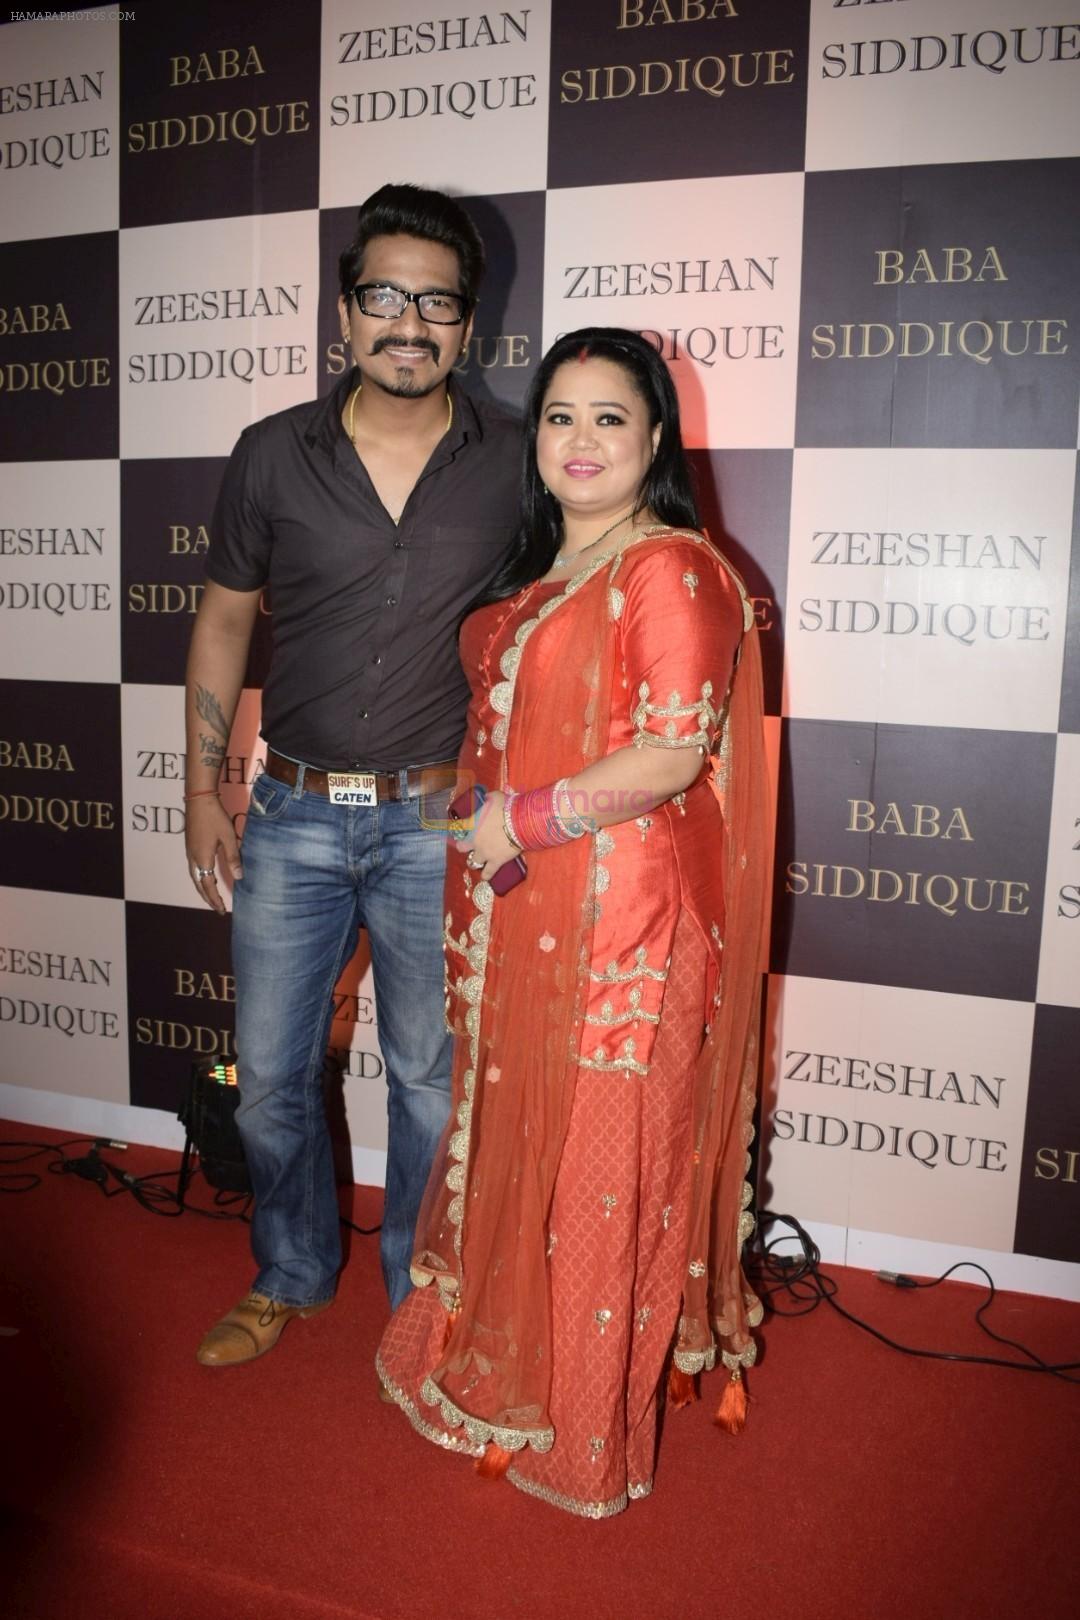 Bharti Singh at Baba Siddiqui's iftaar party in Taj Lands End bandra on 10th June 2018